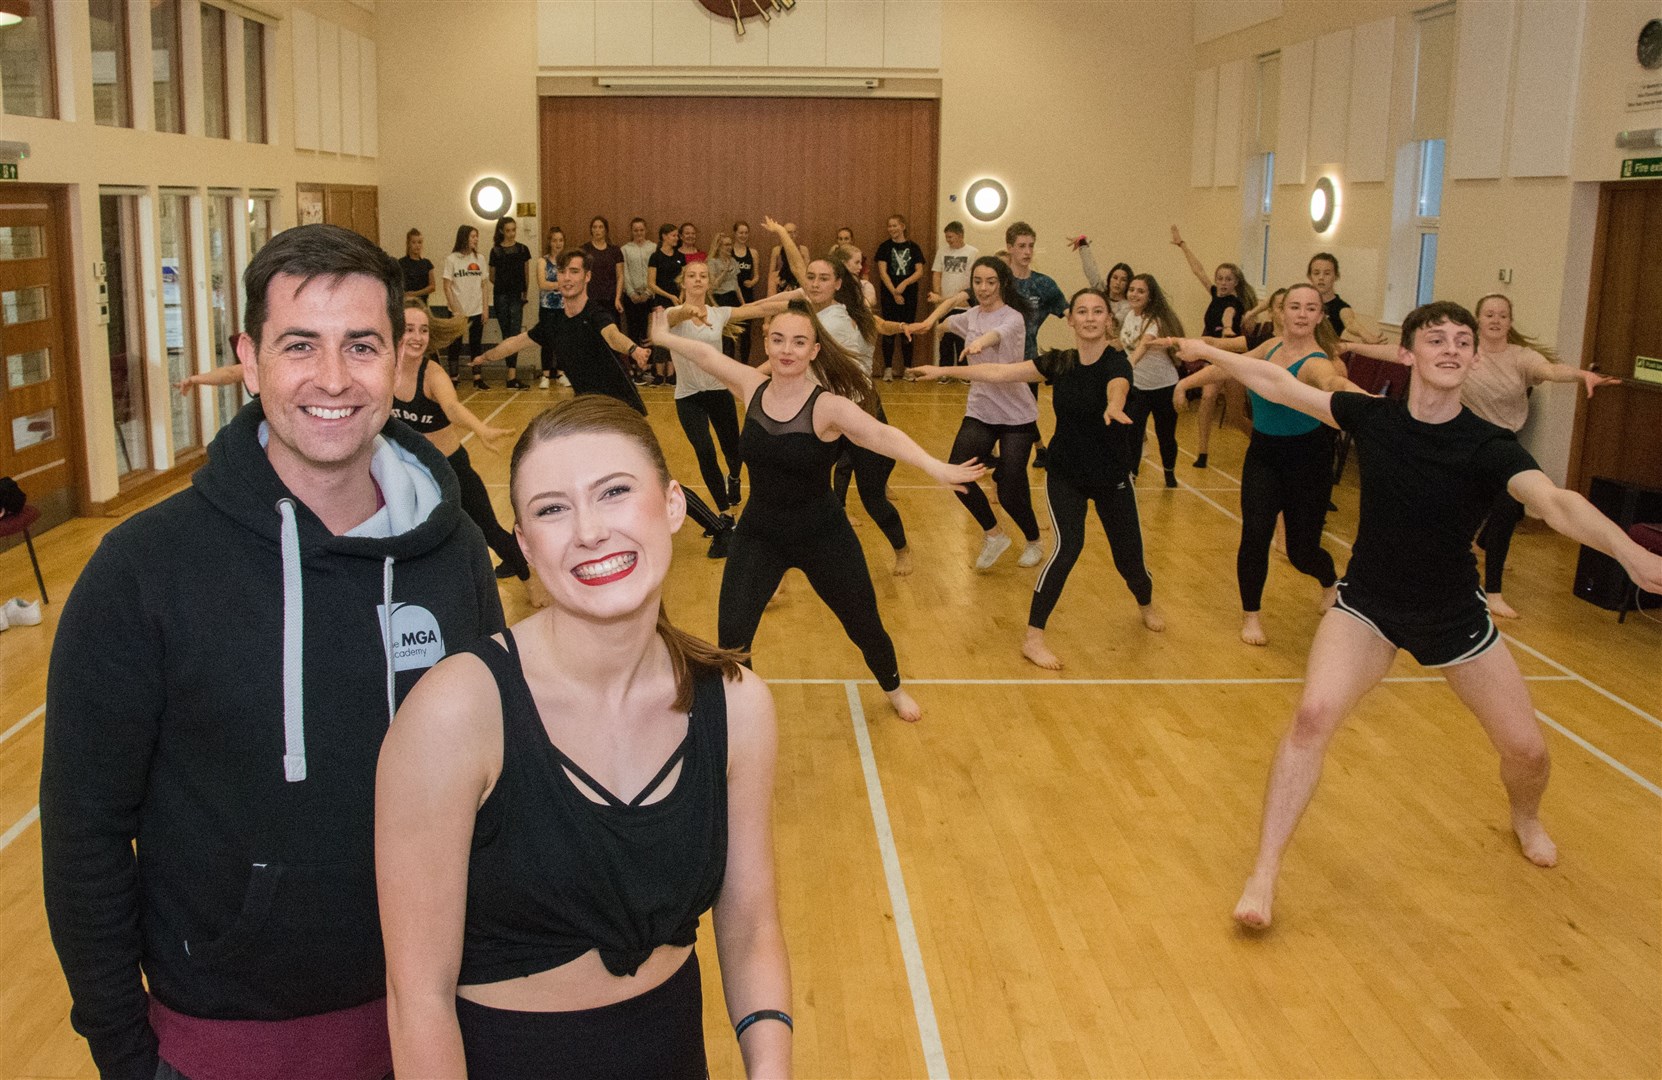 St Giles Theatre group hosted a dance masterclass with Murray Grant (MGA Founder) and Lori Davidson (MGA Student). Picture: Becky Saunderson. Image no. 044661